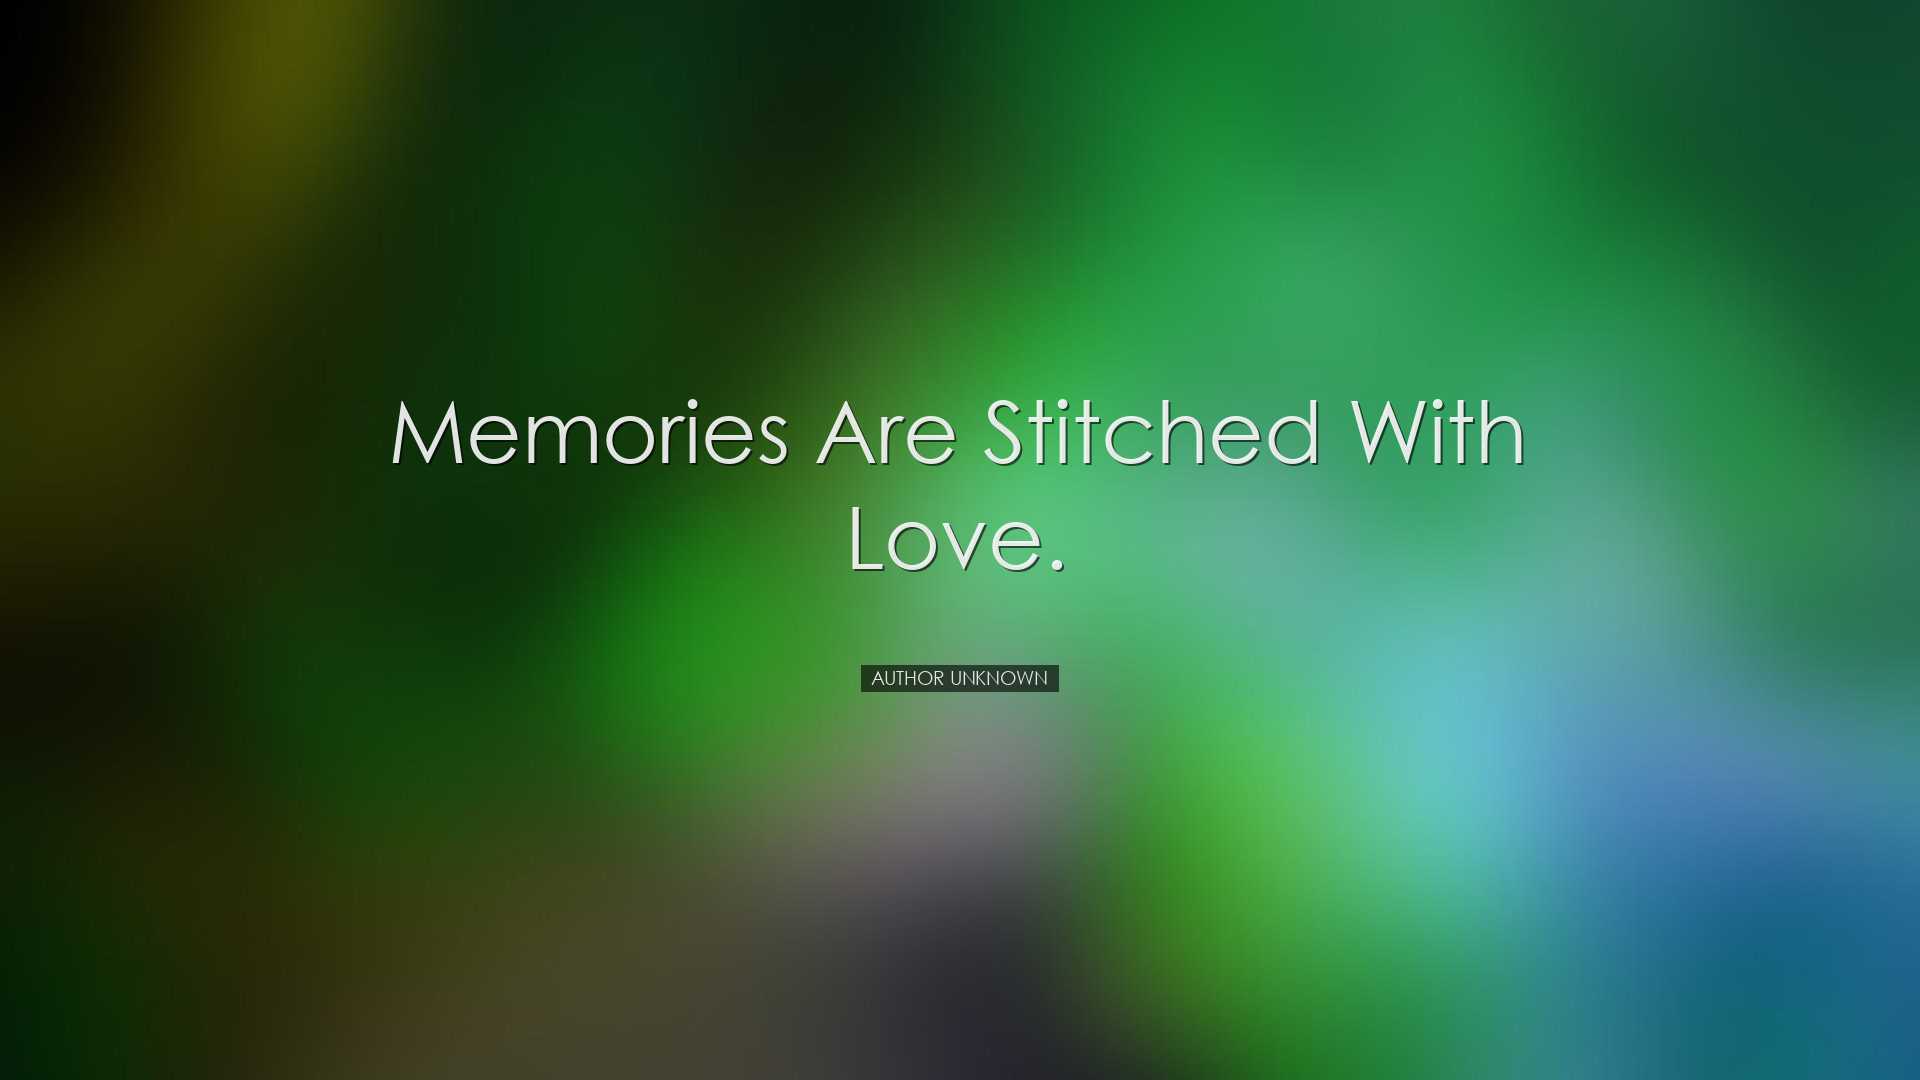 Memories are stitched with love. - Author Unknown